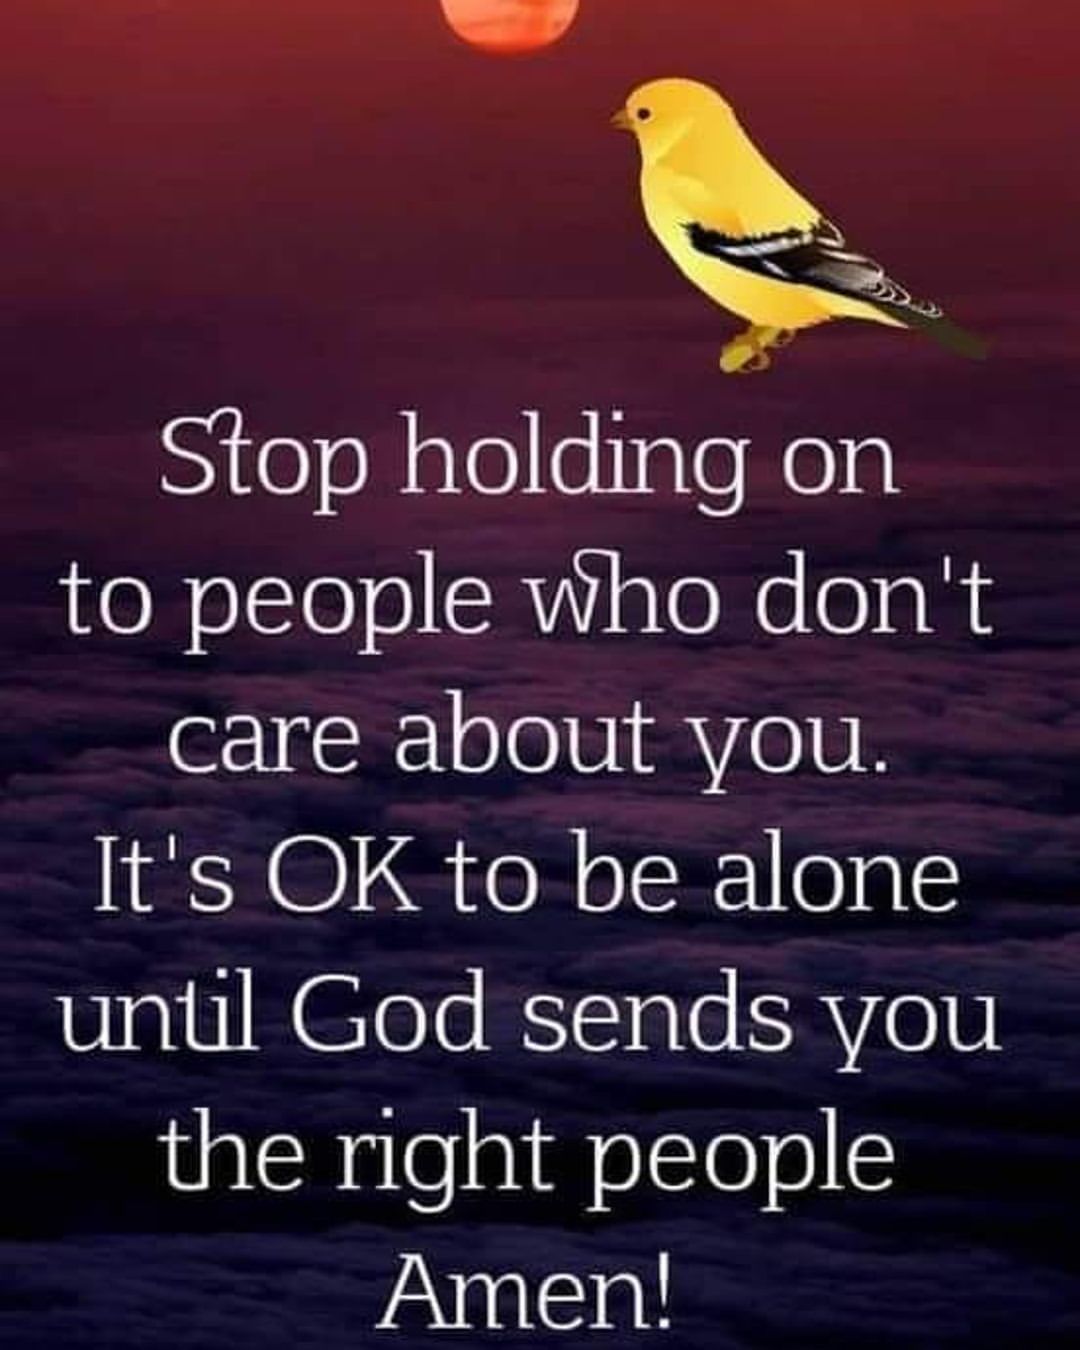 Slop holding on to people who don't care about you. It's ok to be alone until God sends you the right people. Amen!